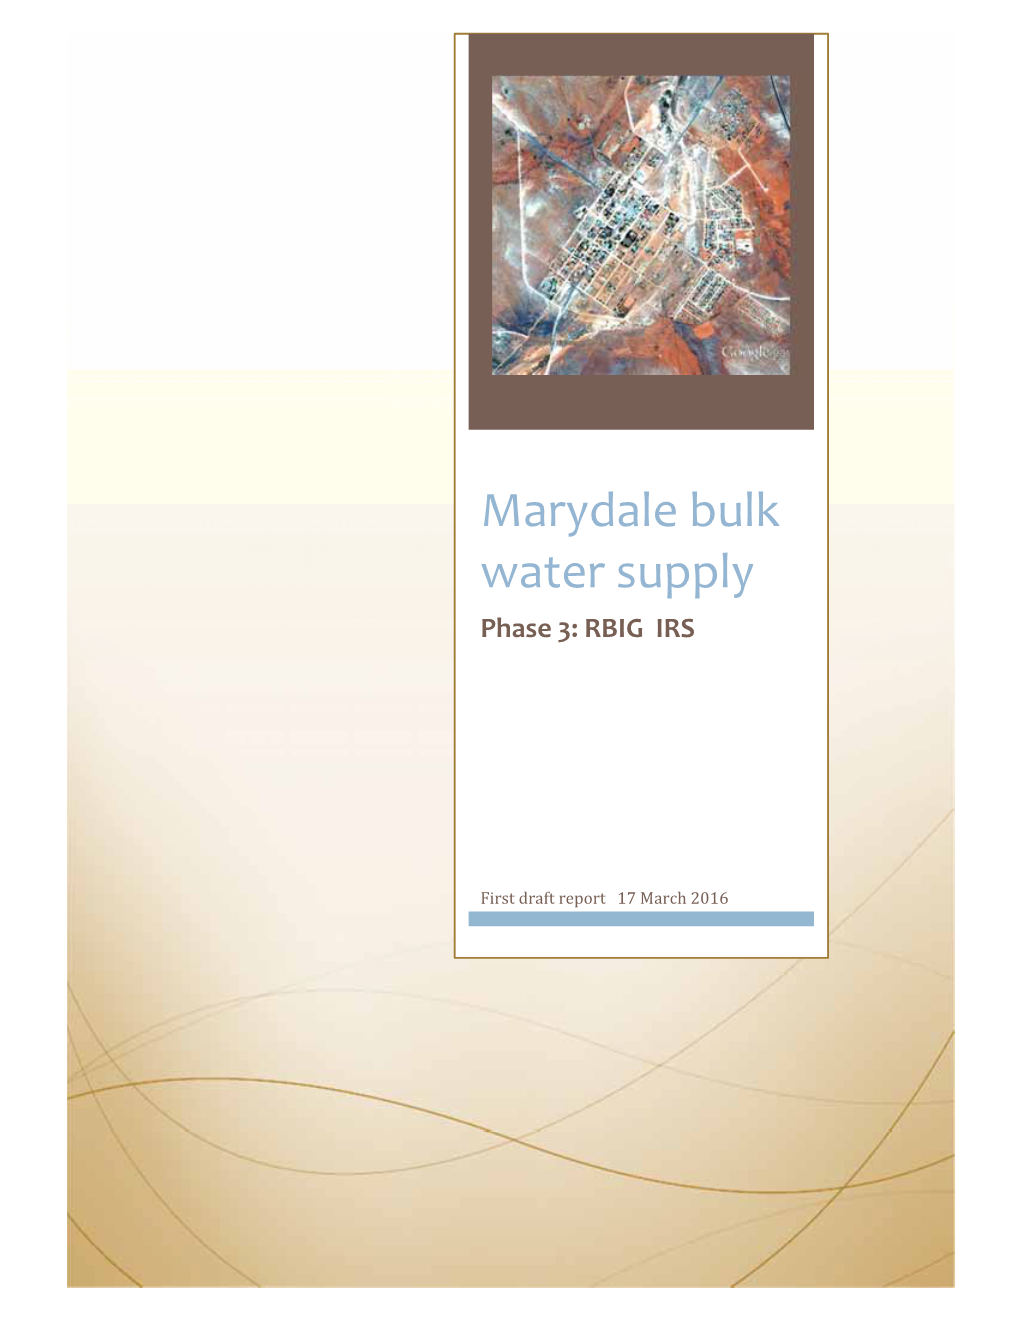 Marydale Bulk Water Supply Phase 3: RBIG IRS